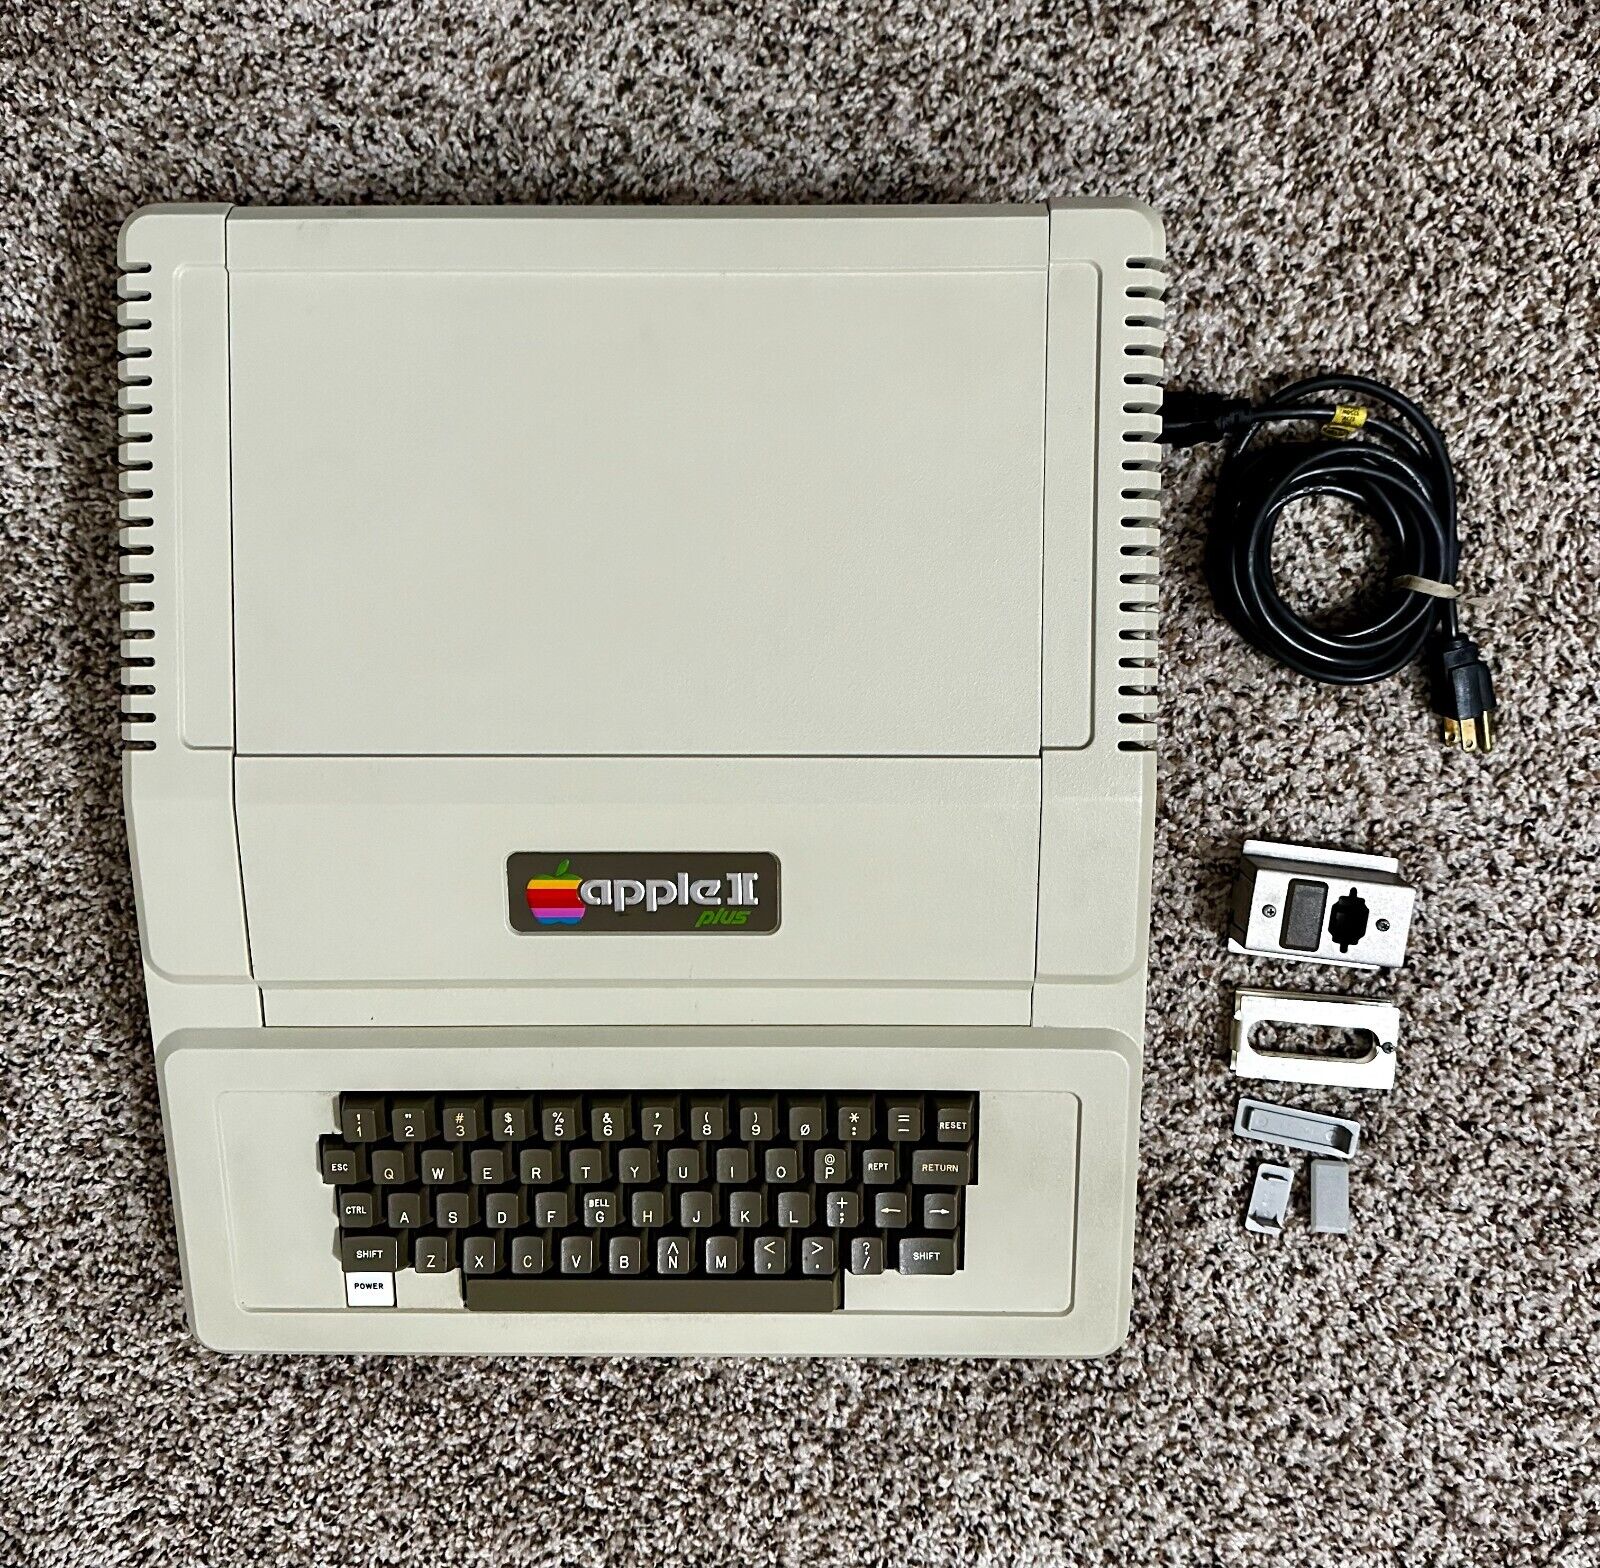 Vintage Apple II 2 Plus A2S1048 Personal Computer